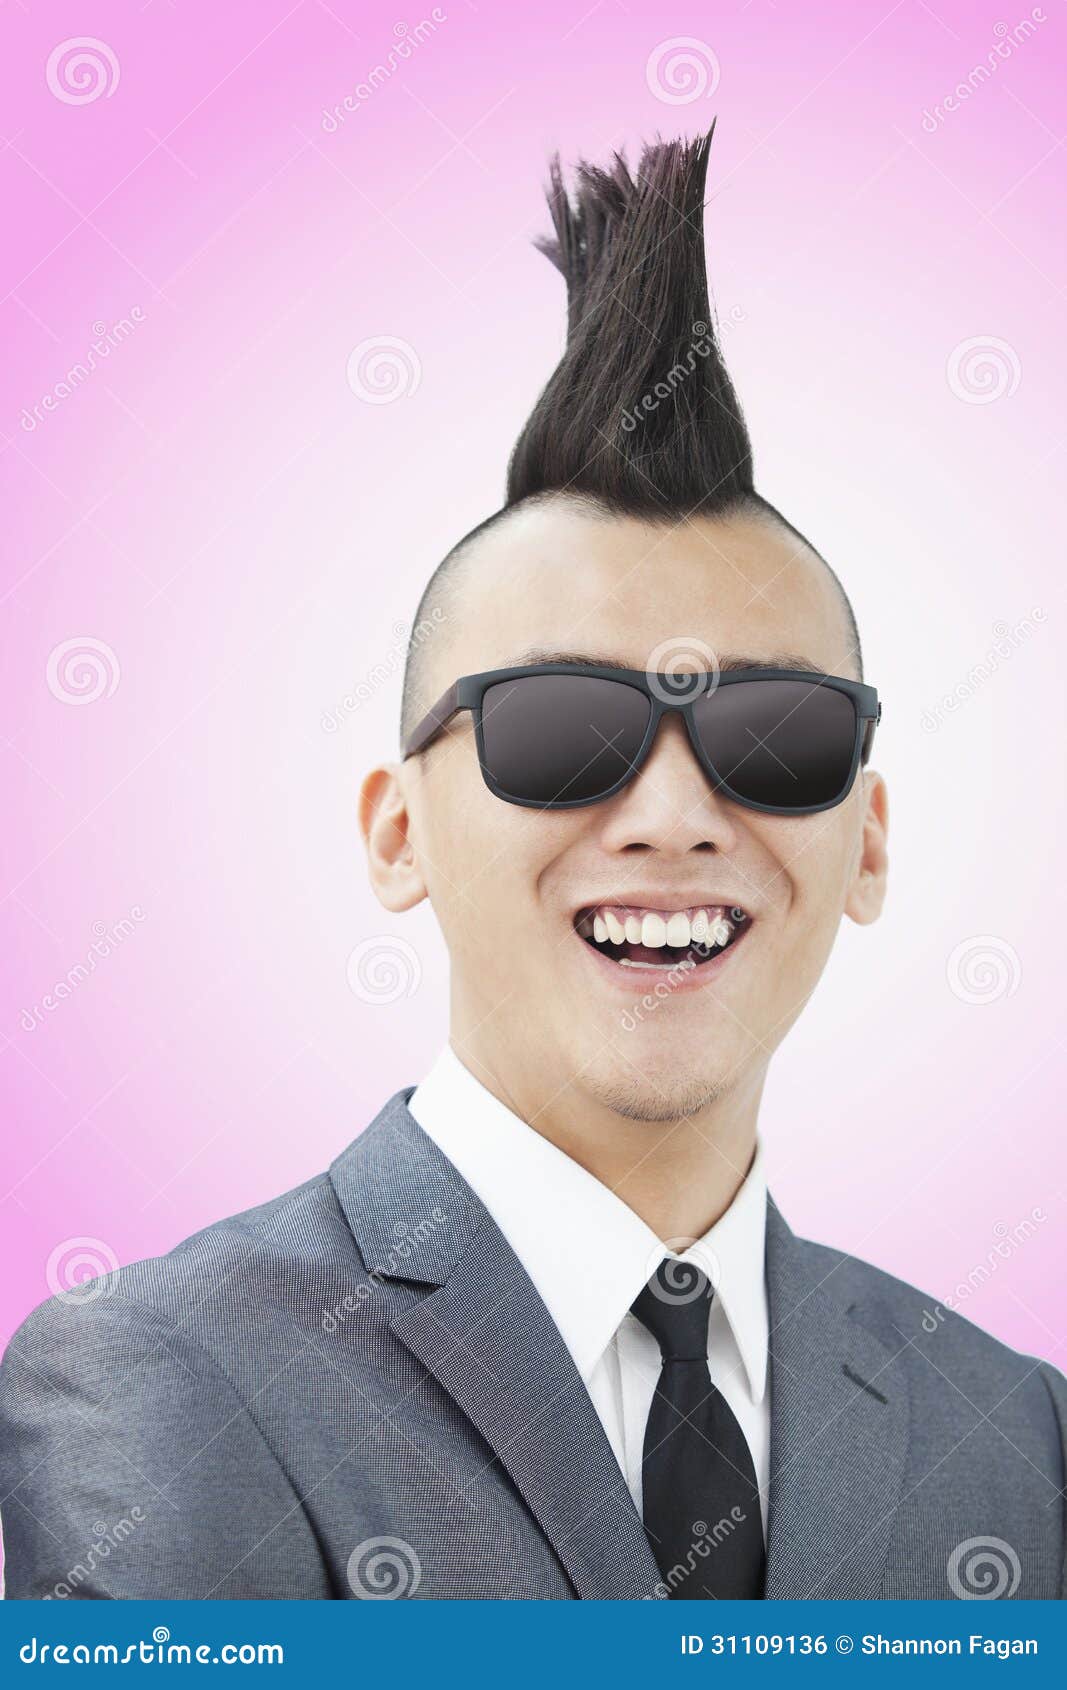 Well-dressed Young Man With Mohawk And Sunglasses Smiling 